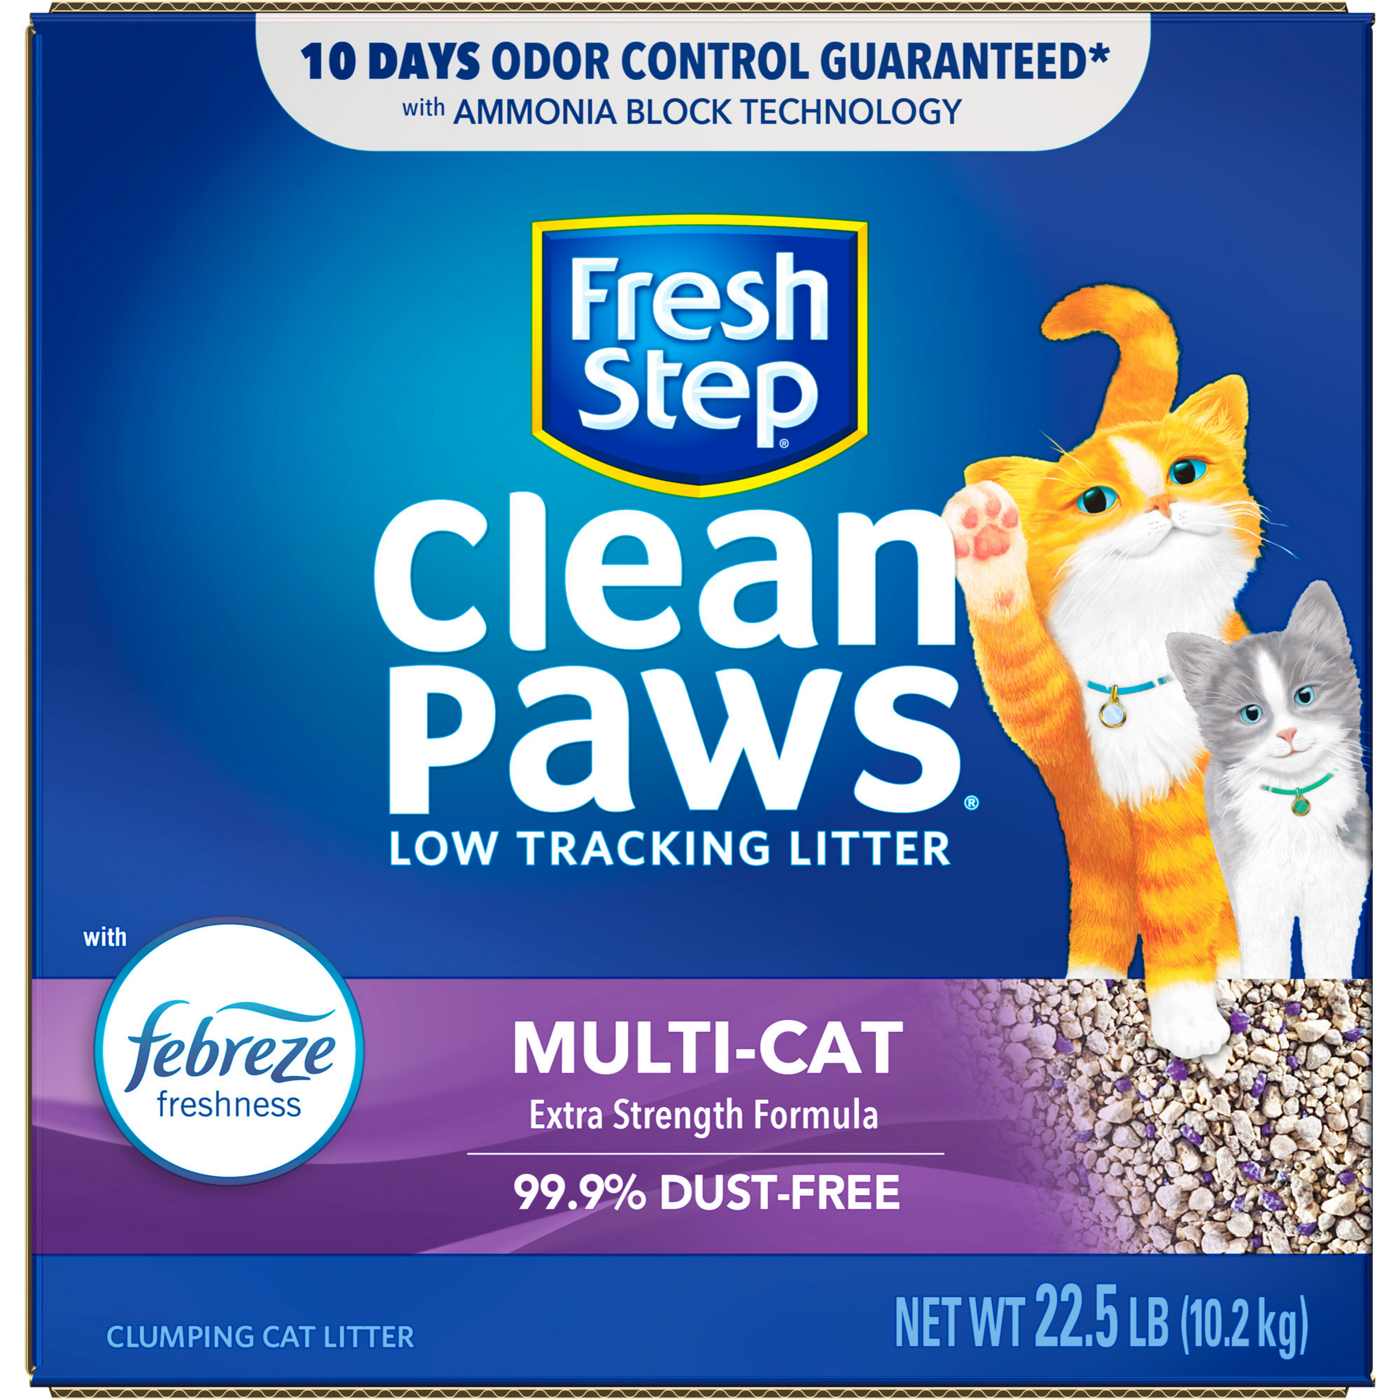 Fresh Step Clean Paws with Febreze Multi-Cat Clumping Litter; image 5 of 6